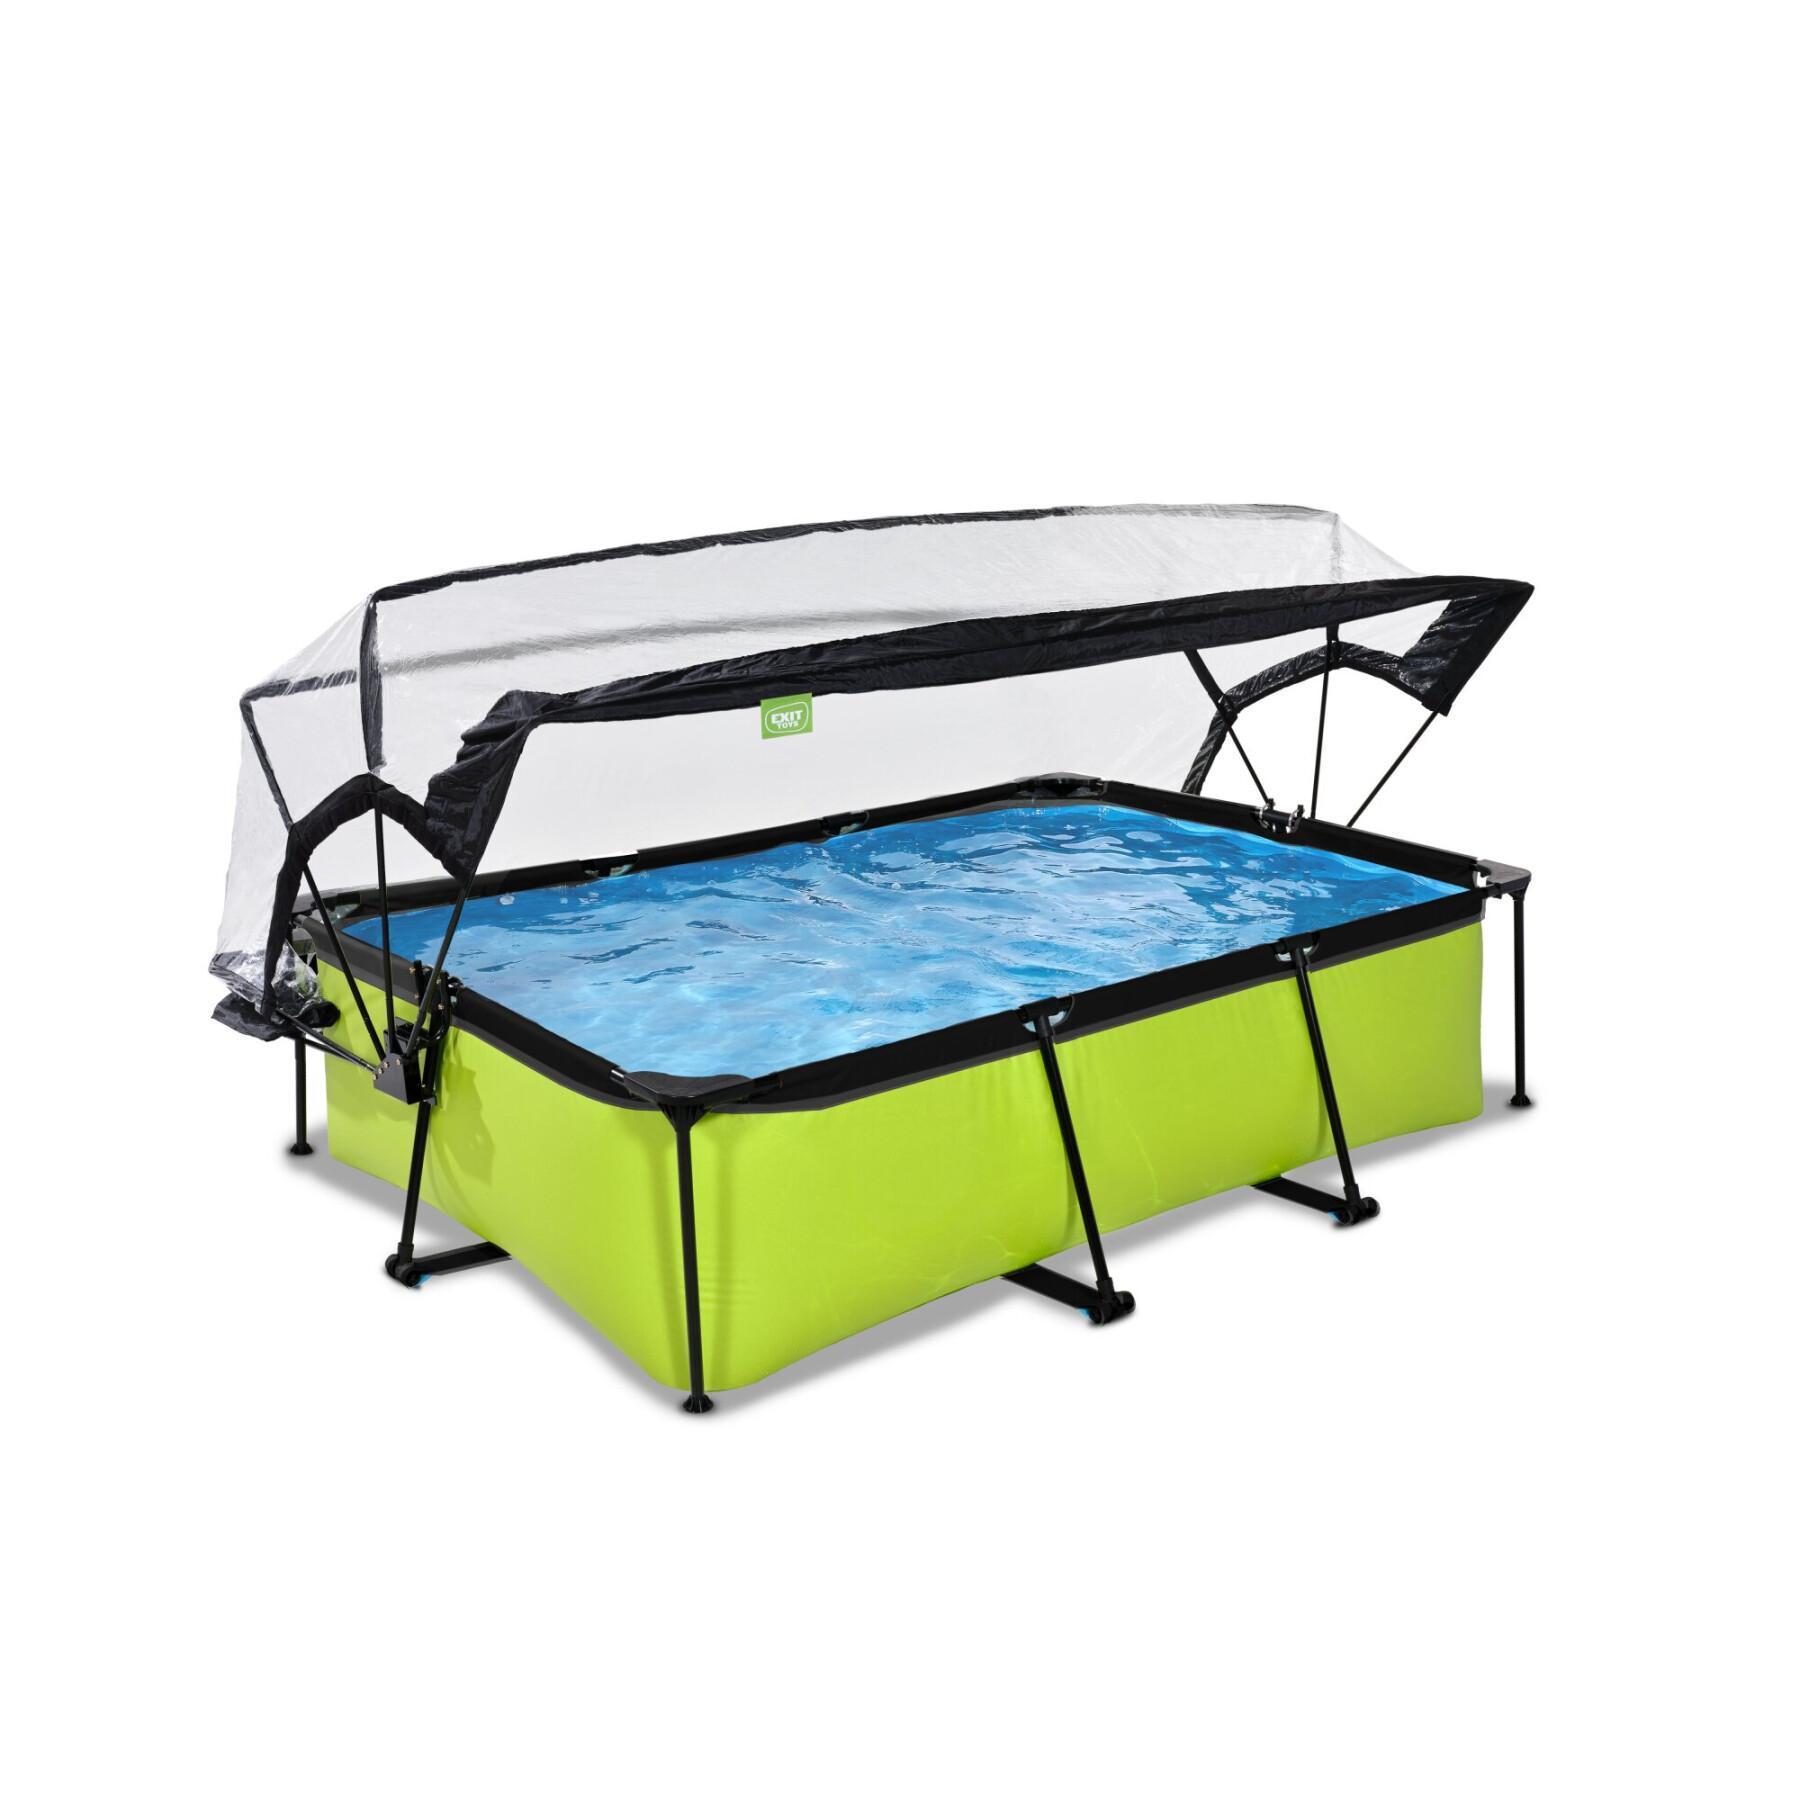 Swimming pool with filter pump and children's dome Exit Toys Lime 220 x 150 x 65 cm